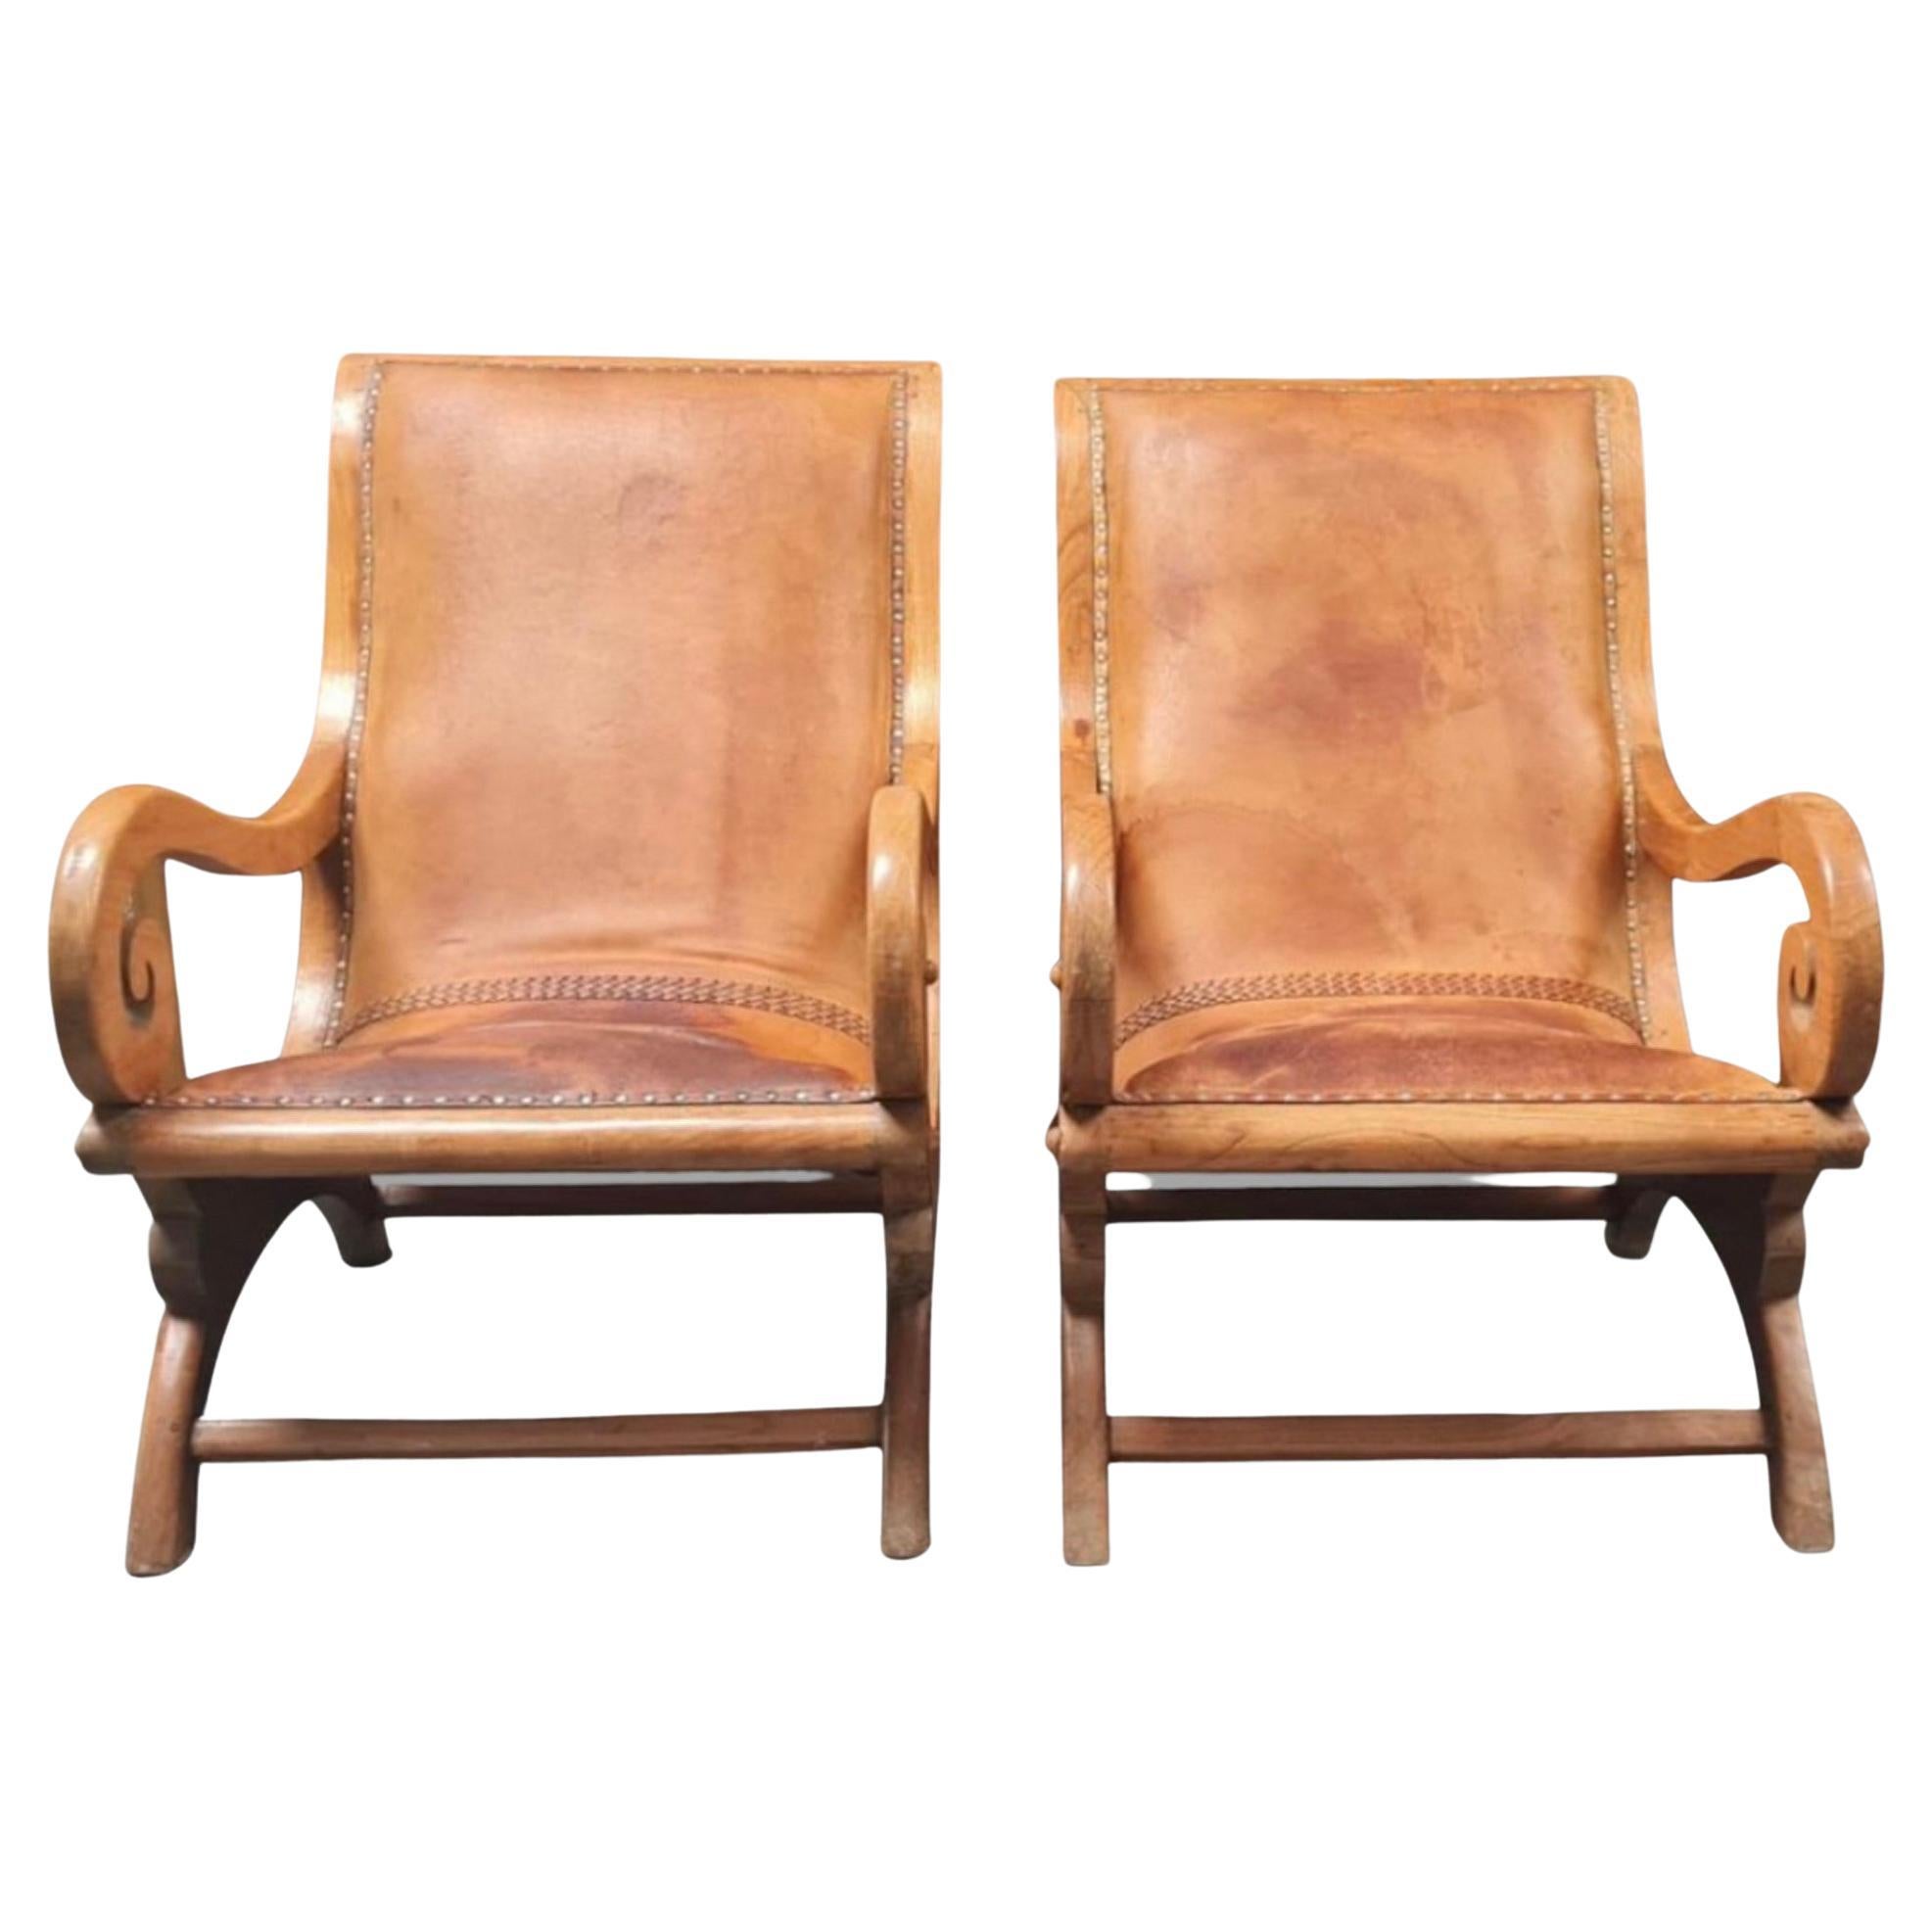 Pair of C1930's Tan Fruitwood Plantation Leathered Armchairs For Sale